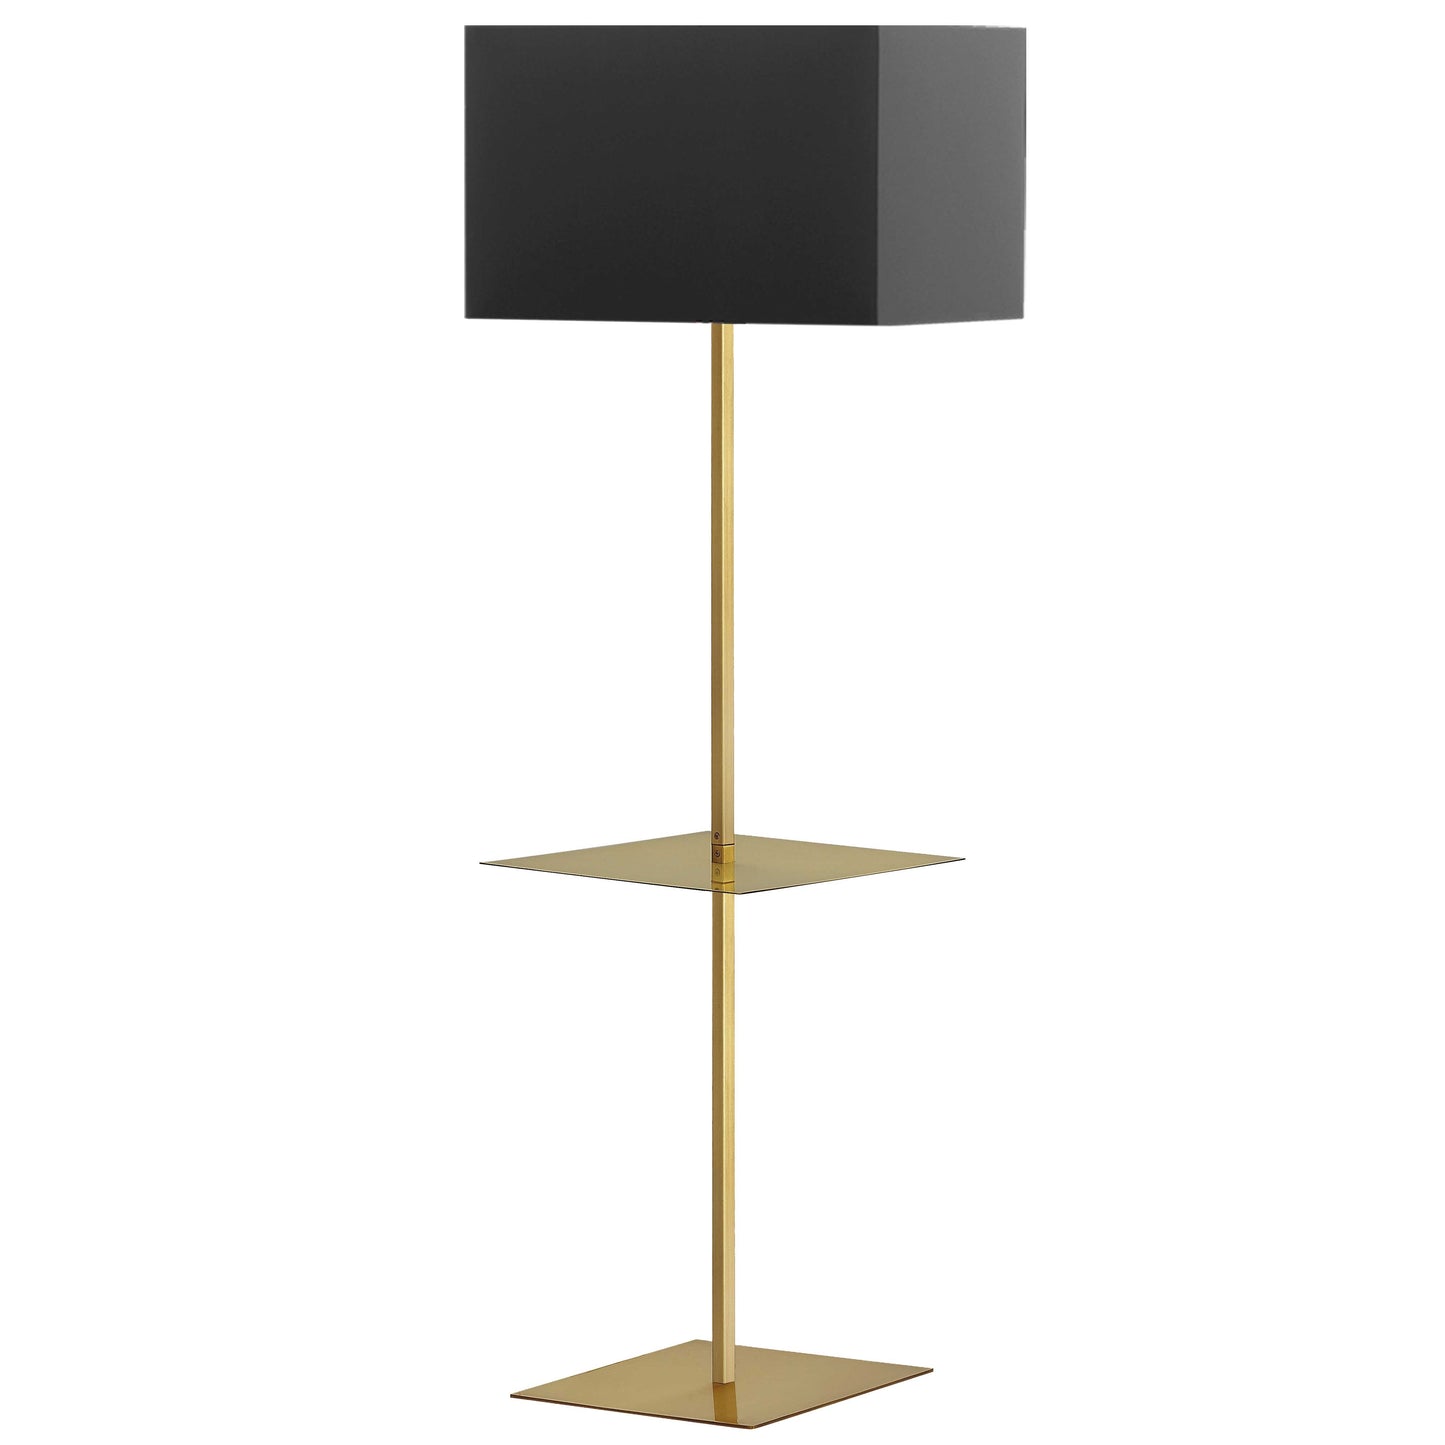 Dainolite 1 Light Incandescent Square Base with Square Shelf, Aged Brass with Black Shade Floor Lamp